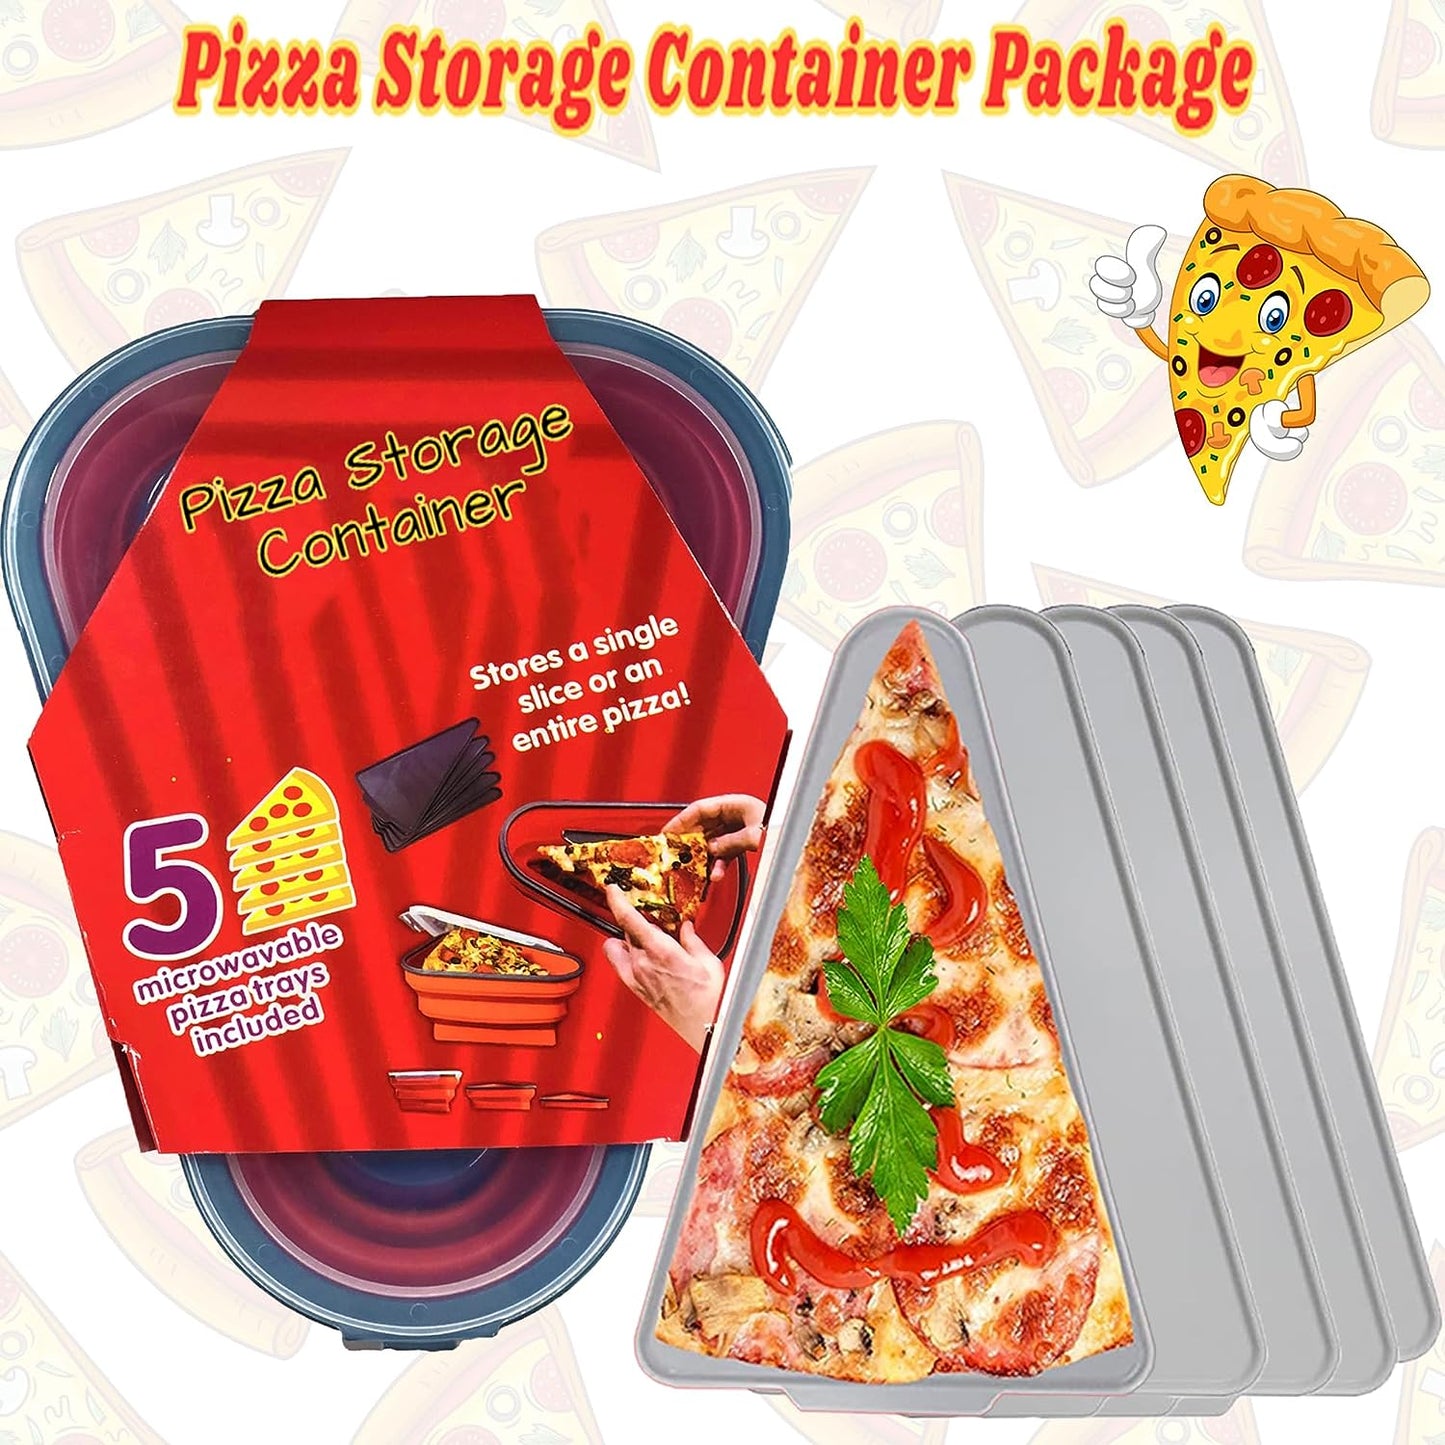 Pizza Storage Container Silicone Collapsible includes 5 trays, Reusable Pizza Storage Container, Saves Fridge Space - Microwave & Dishwasher Safe, Pizza Slice Pack Storage Container Expandable, Leftover Pizza Slice Storage Container Saver, Silic